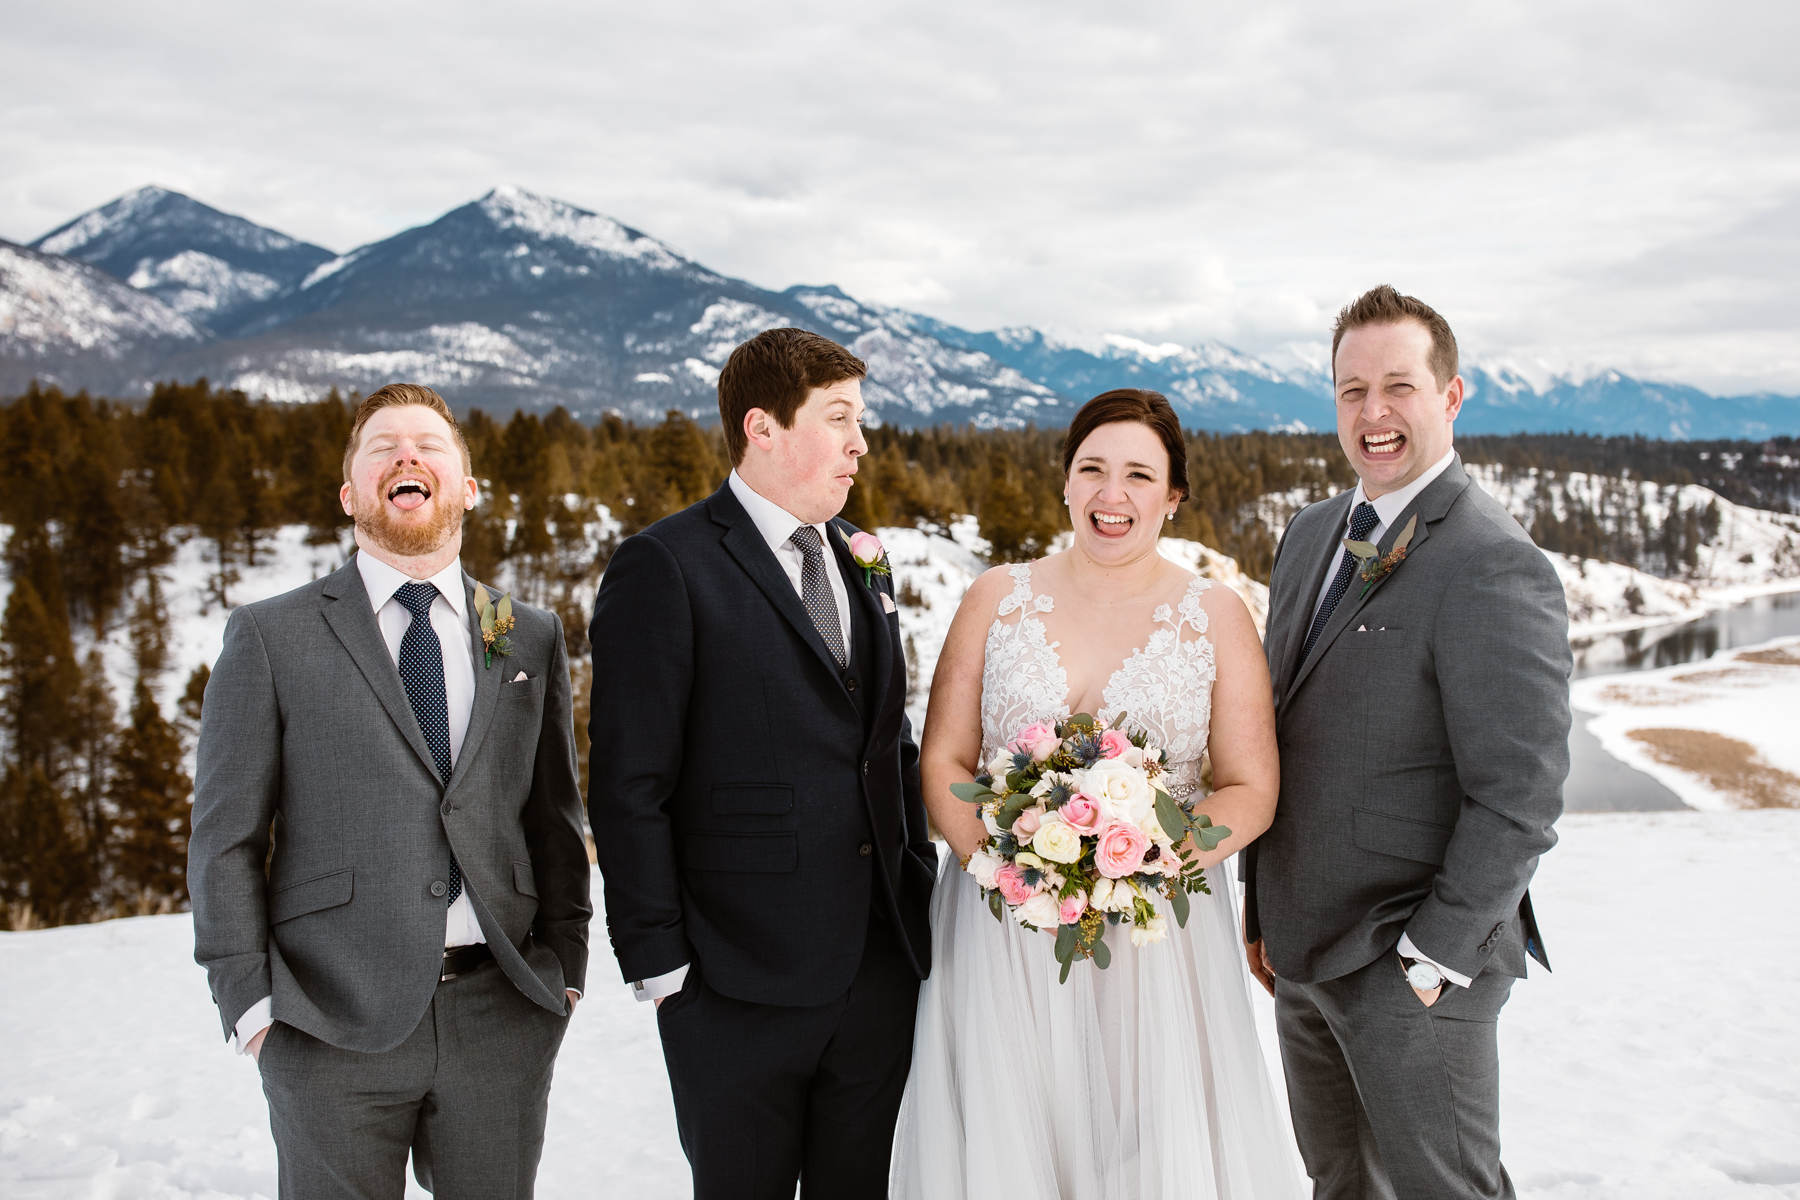 Invermere Wedding Photographers at Eagle Ranch and Panorama Ski Resort - Image 35